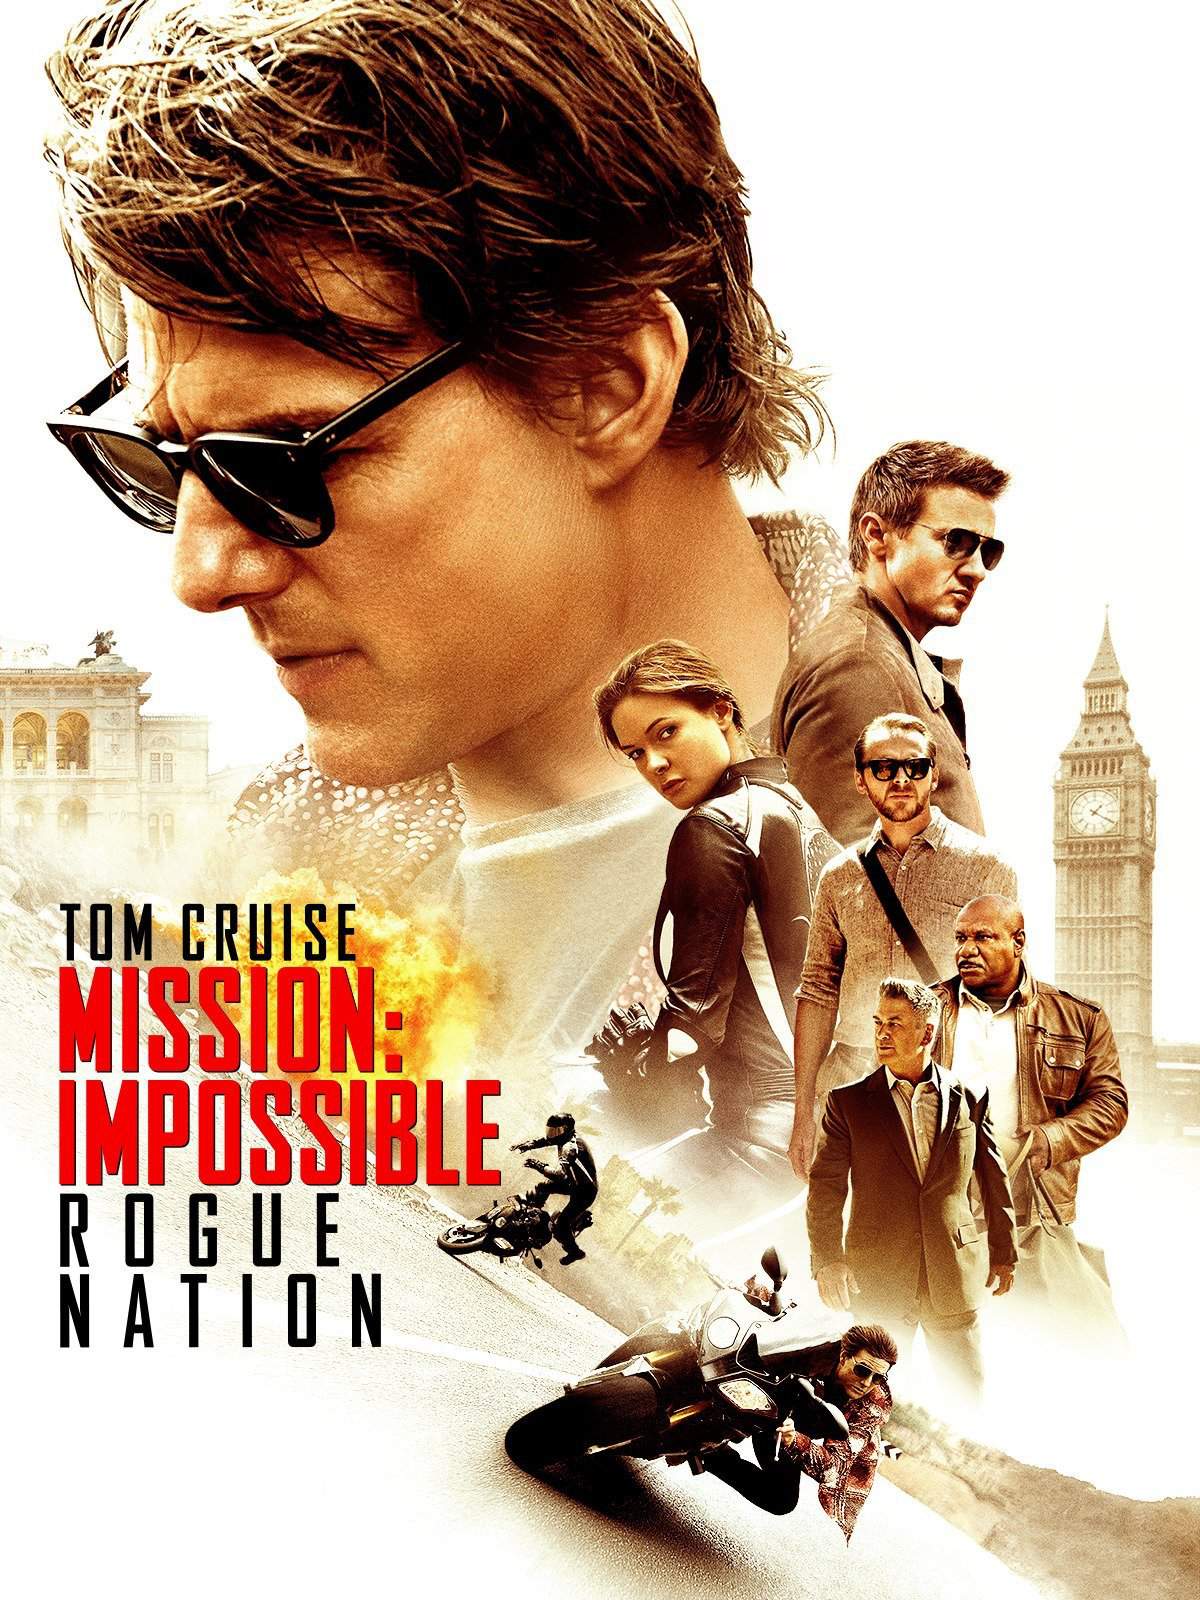 Mission: Impossible - Rogue Nation (2015) review | Movies & TV Amino